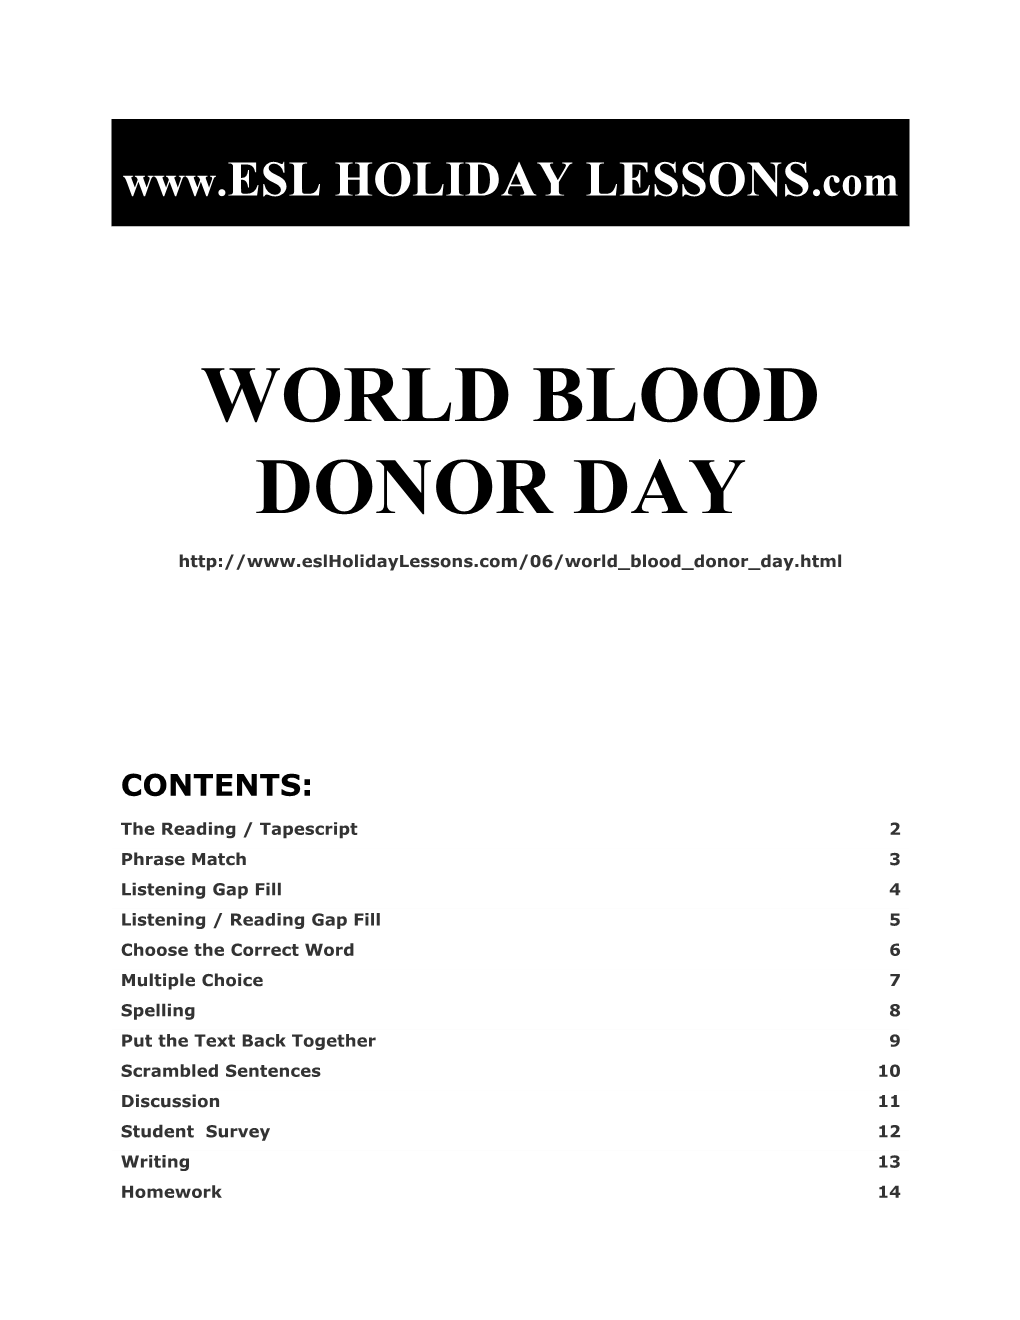 Holiday Lessons - World Blood Donor Day